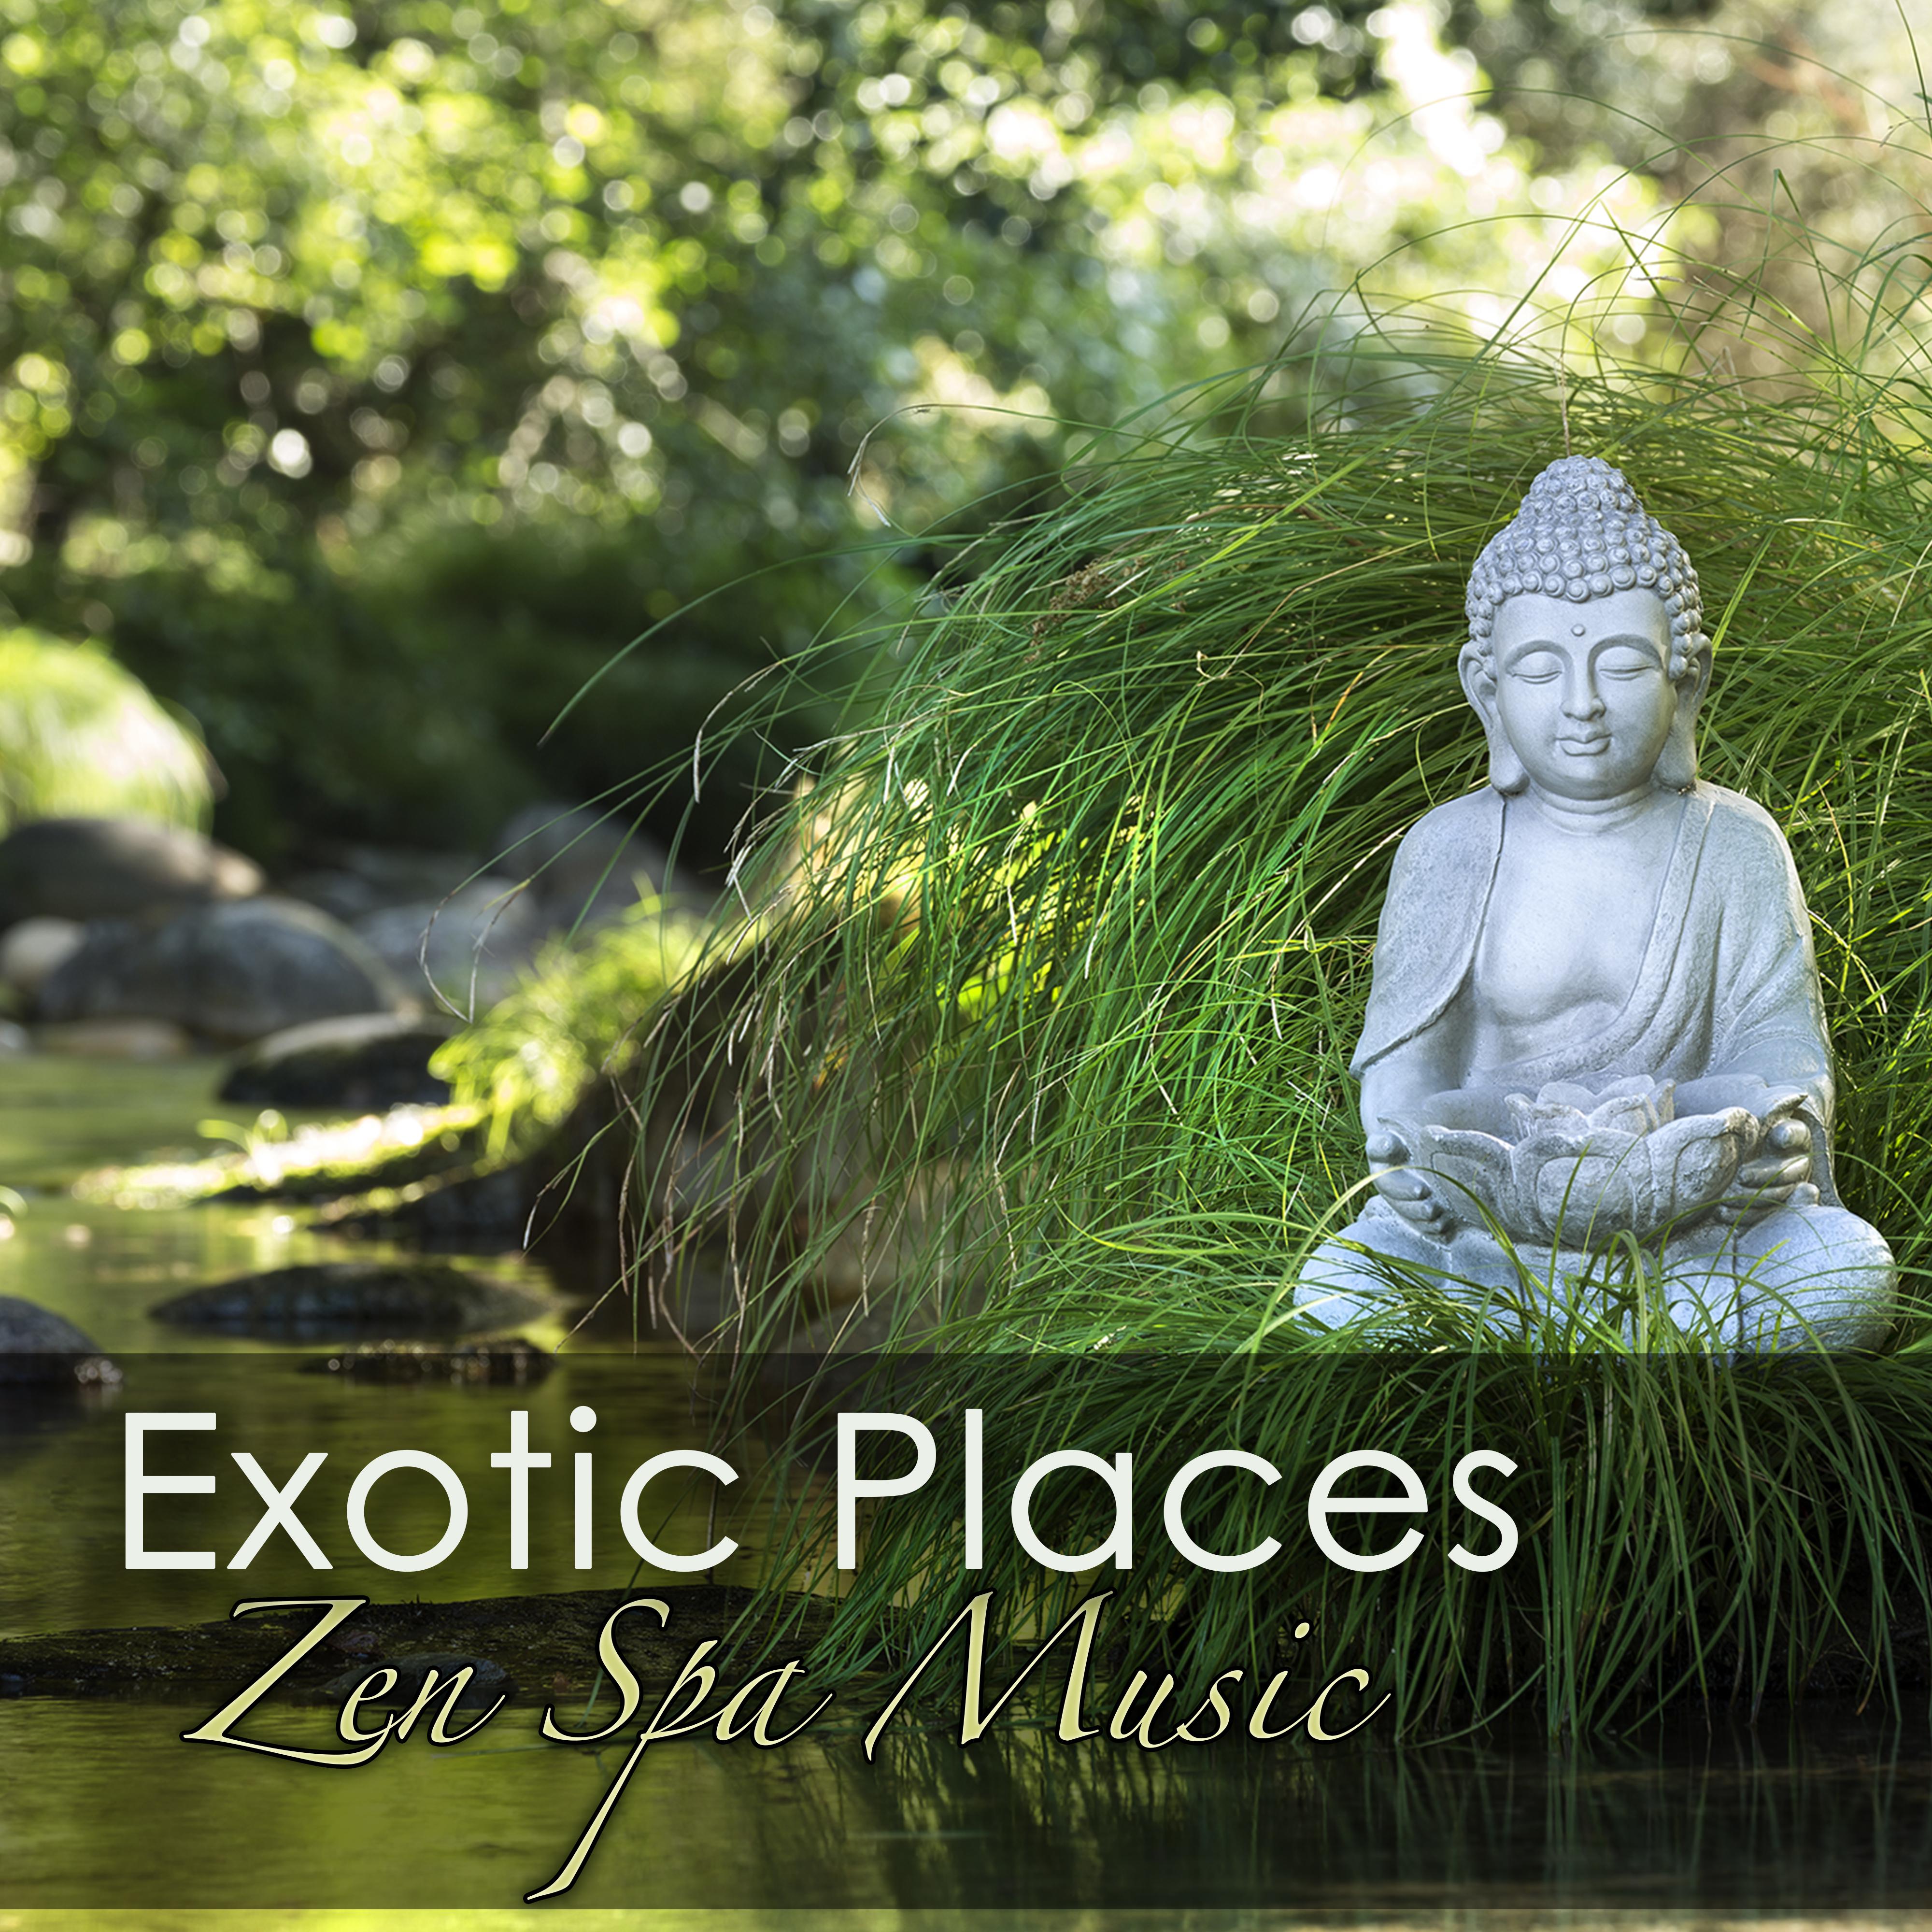 Exotic Places Zen Spa Music – Luxury Spa Songs for Massage, Spa Treatments, Holistic Health & Natural Beauty